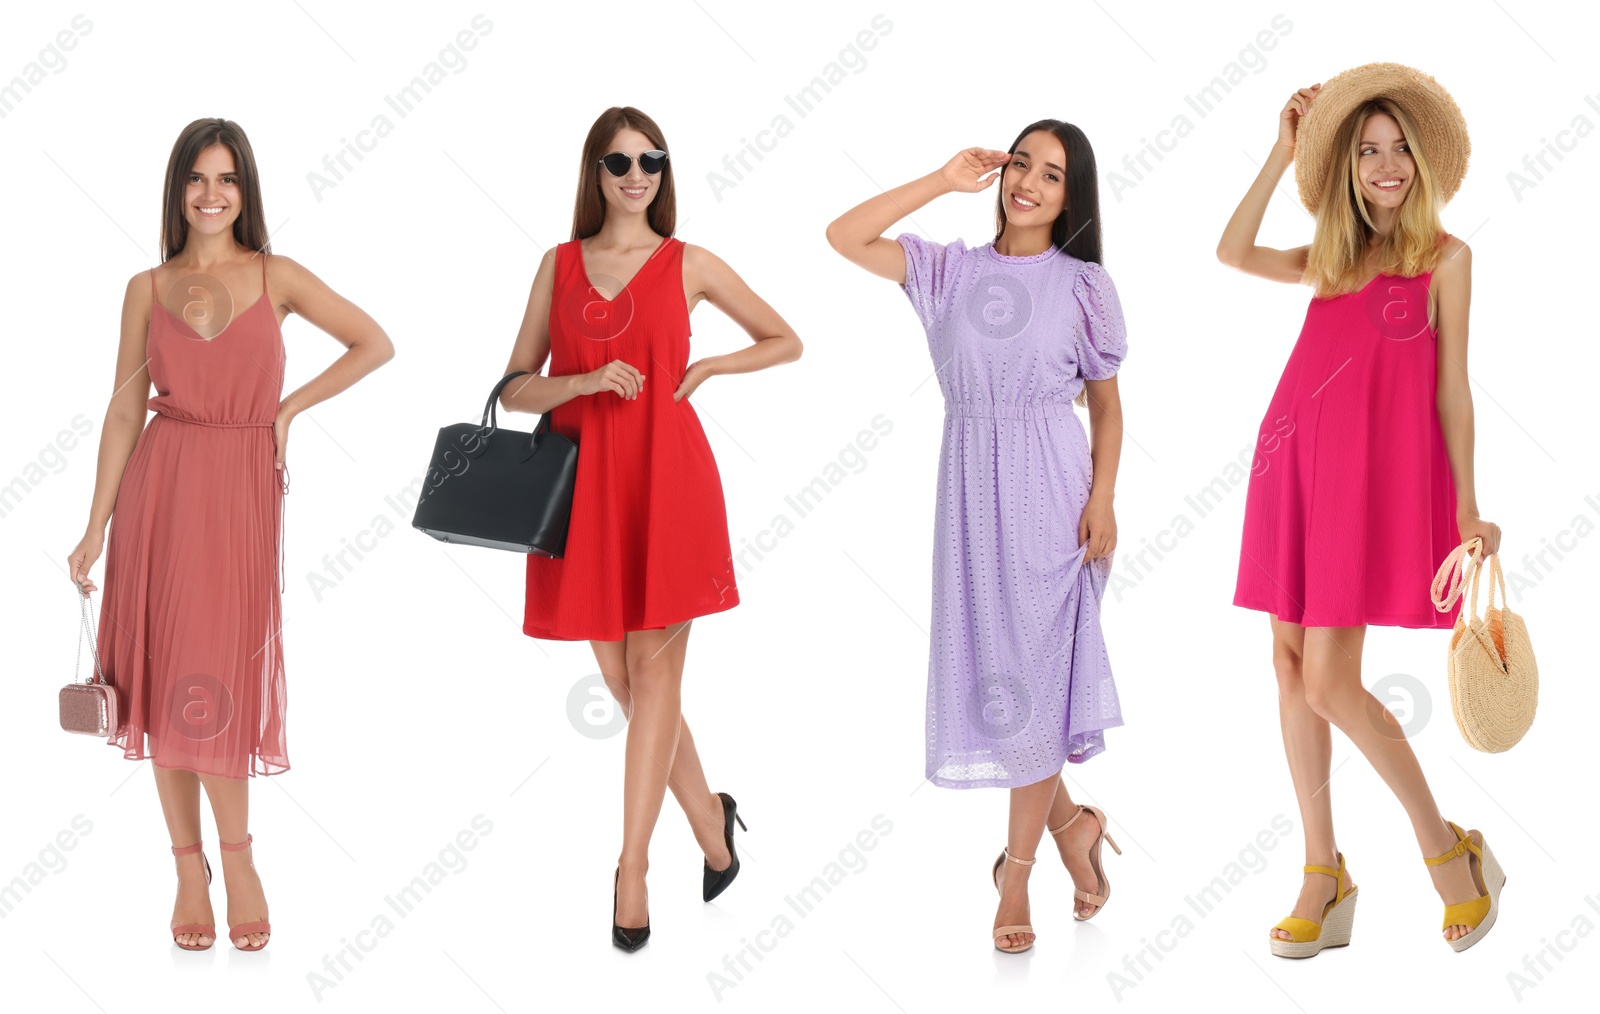 Image of Collage with photos of women wearing different dresses on white background